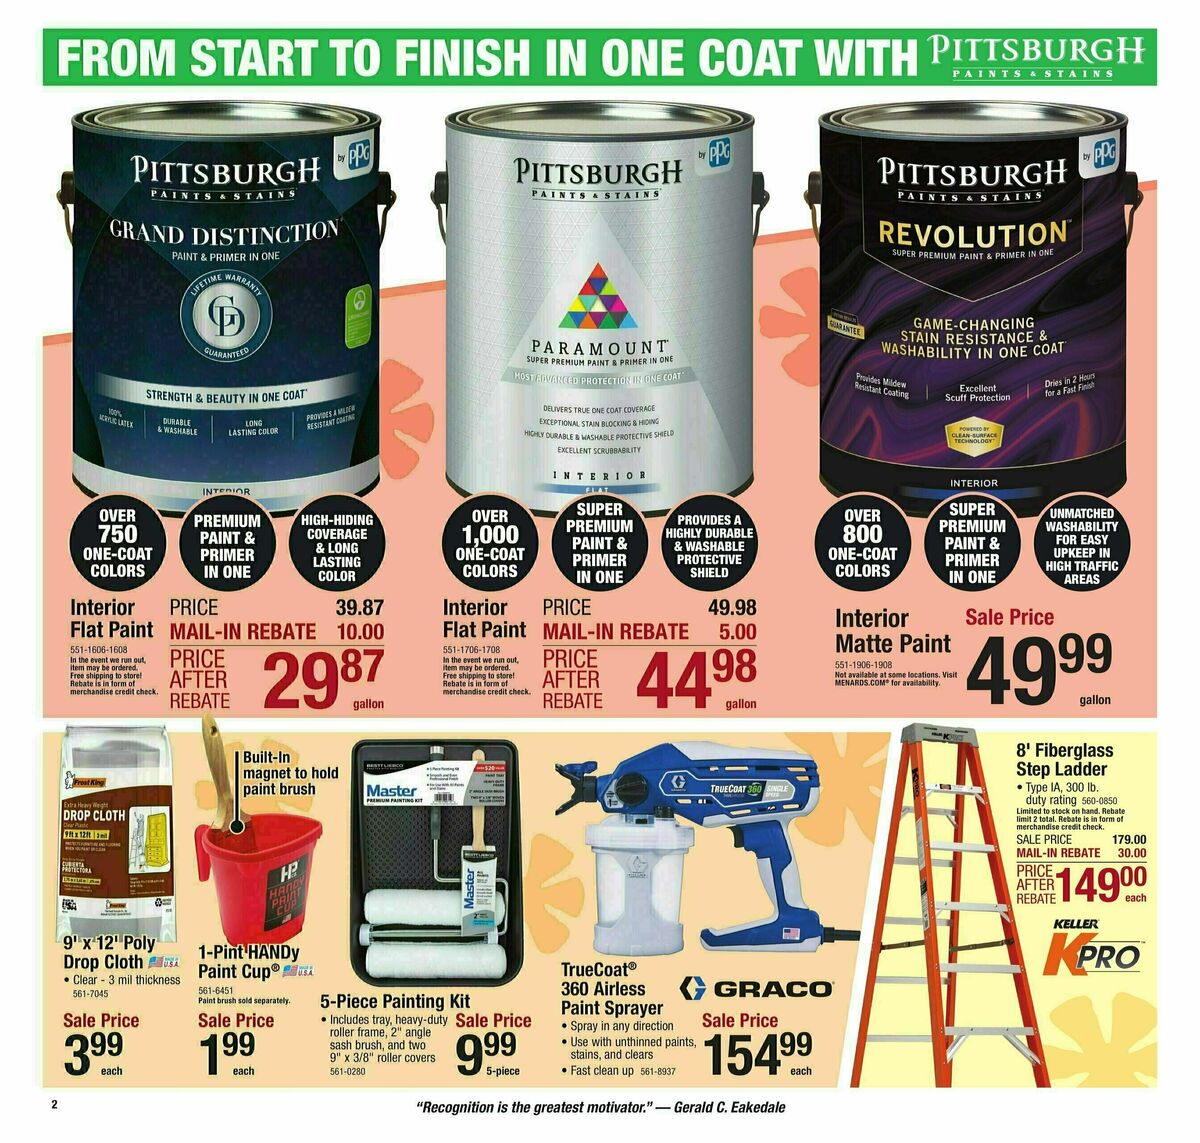 Menards Menard Days Sale Weekly Ad from February 14